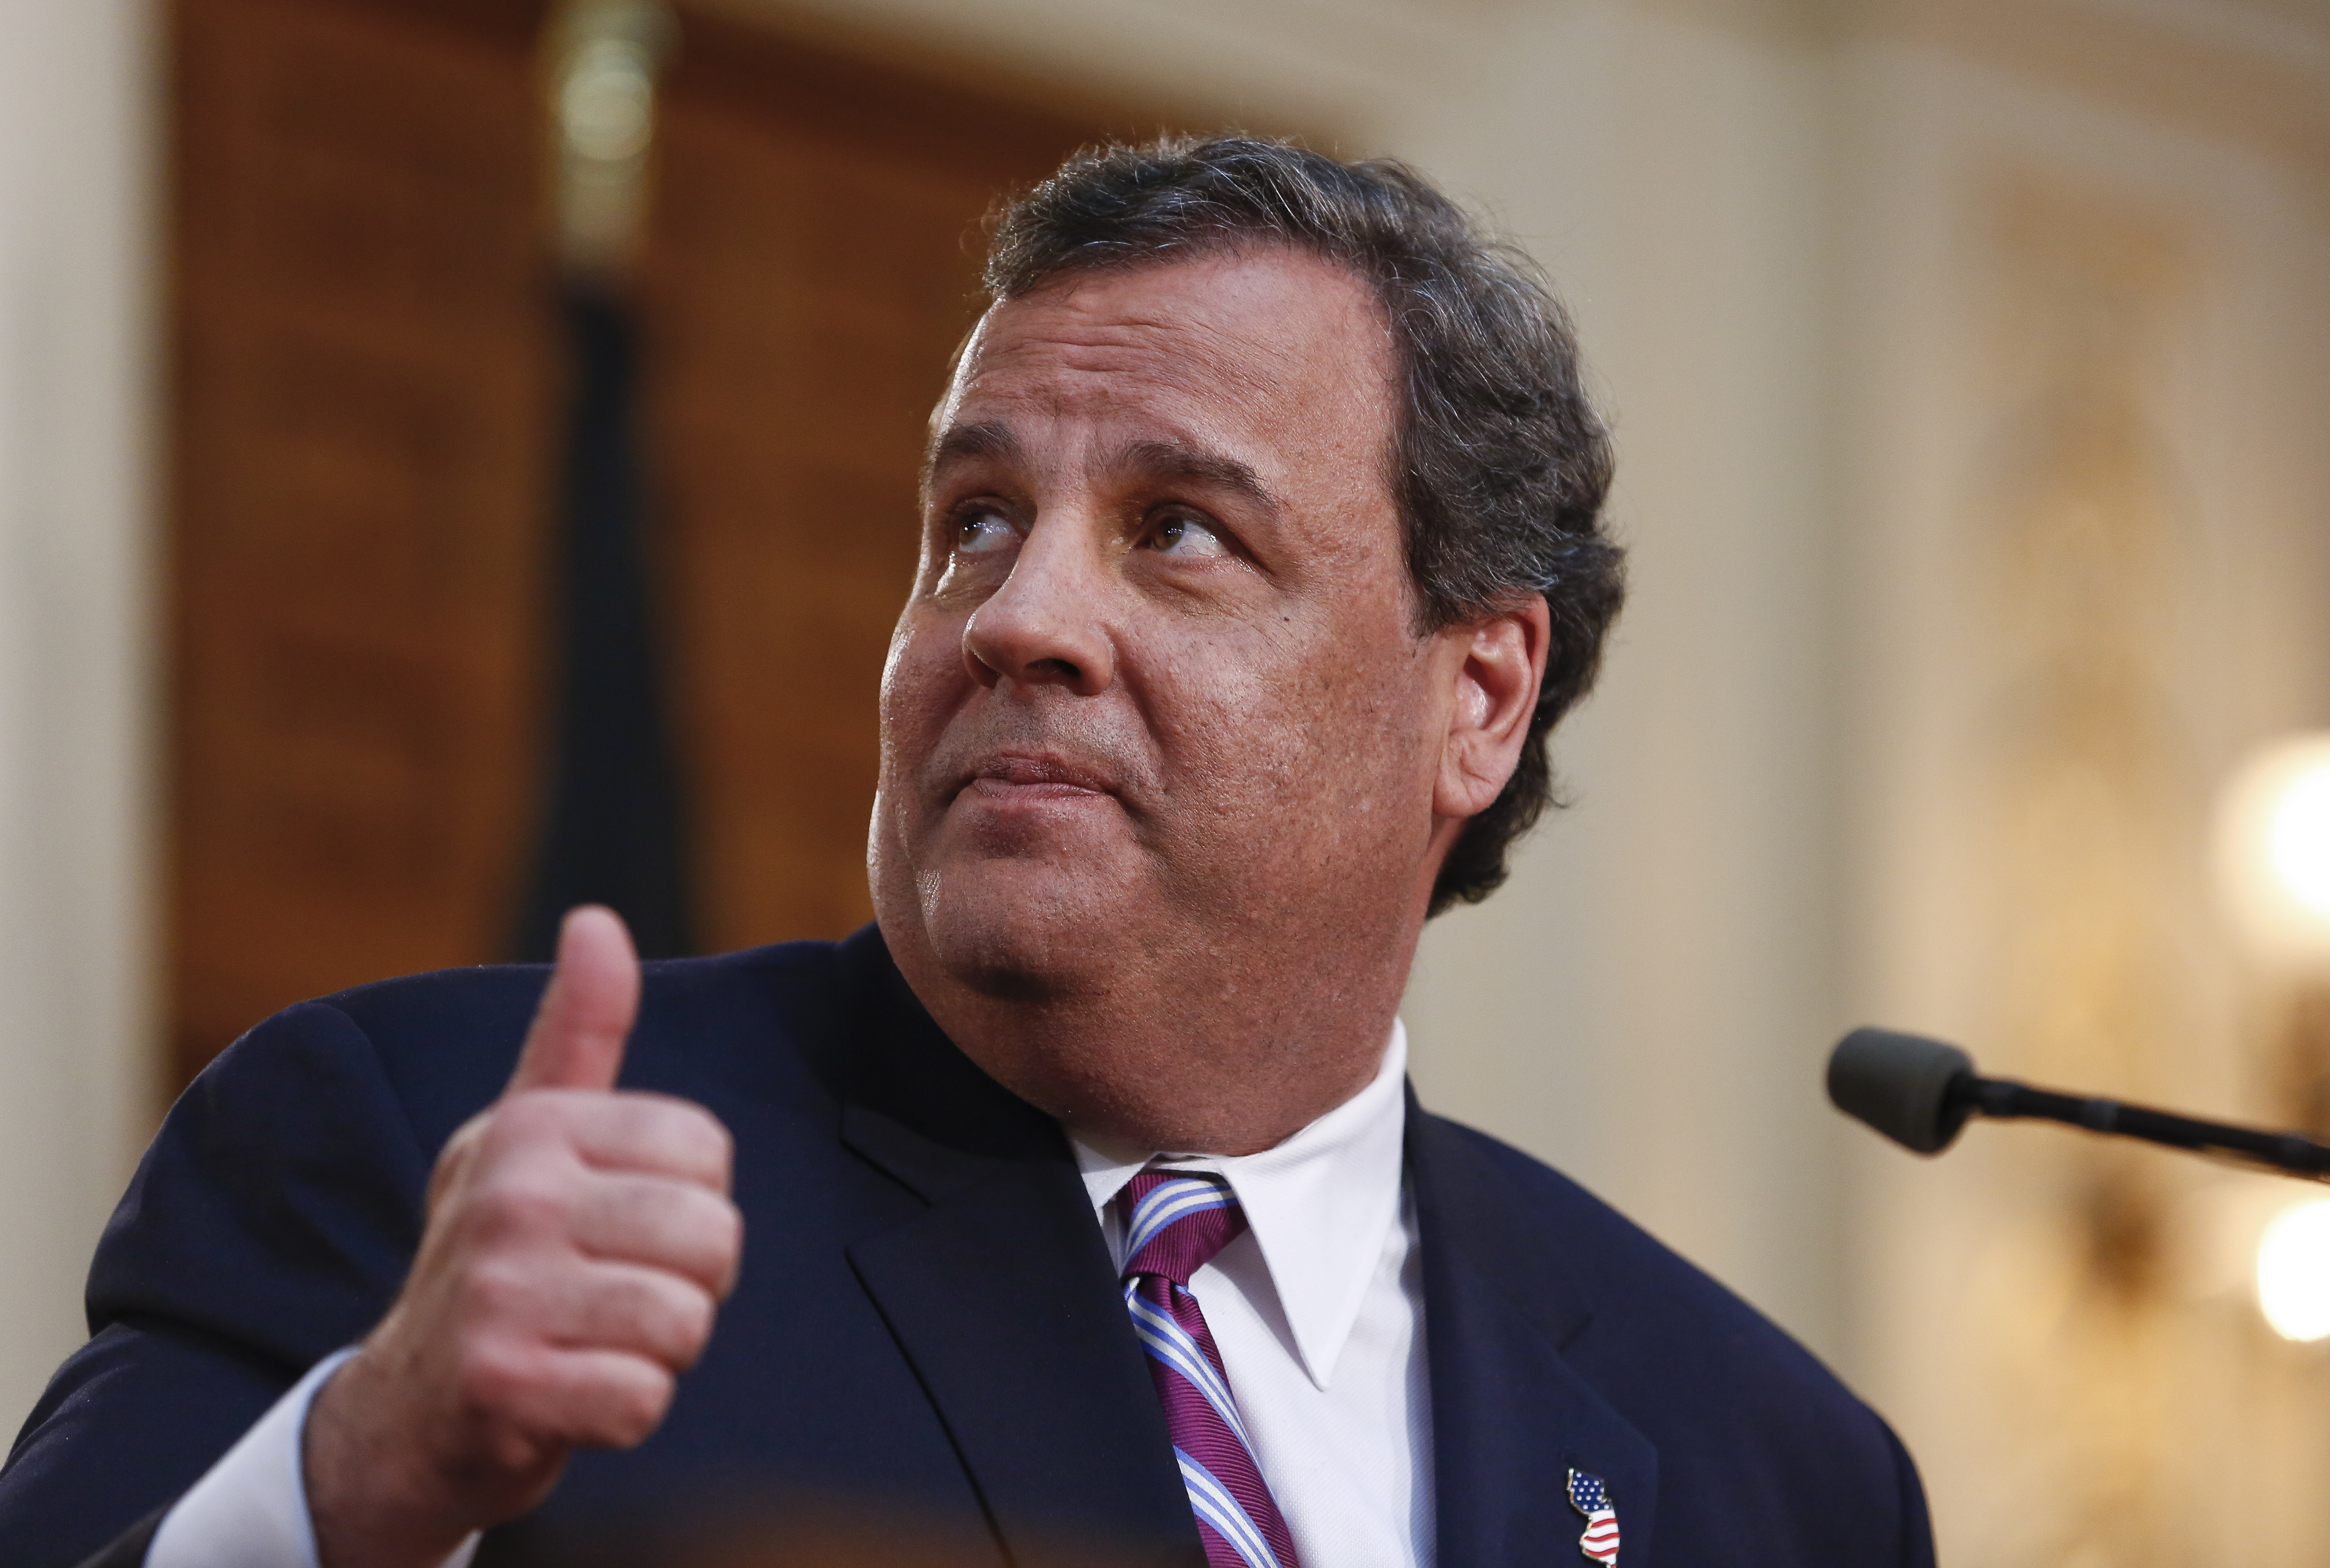 Confirmed: Pretty much nobody likes Chris Christie anymore